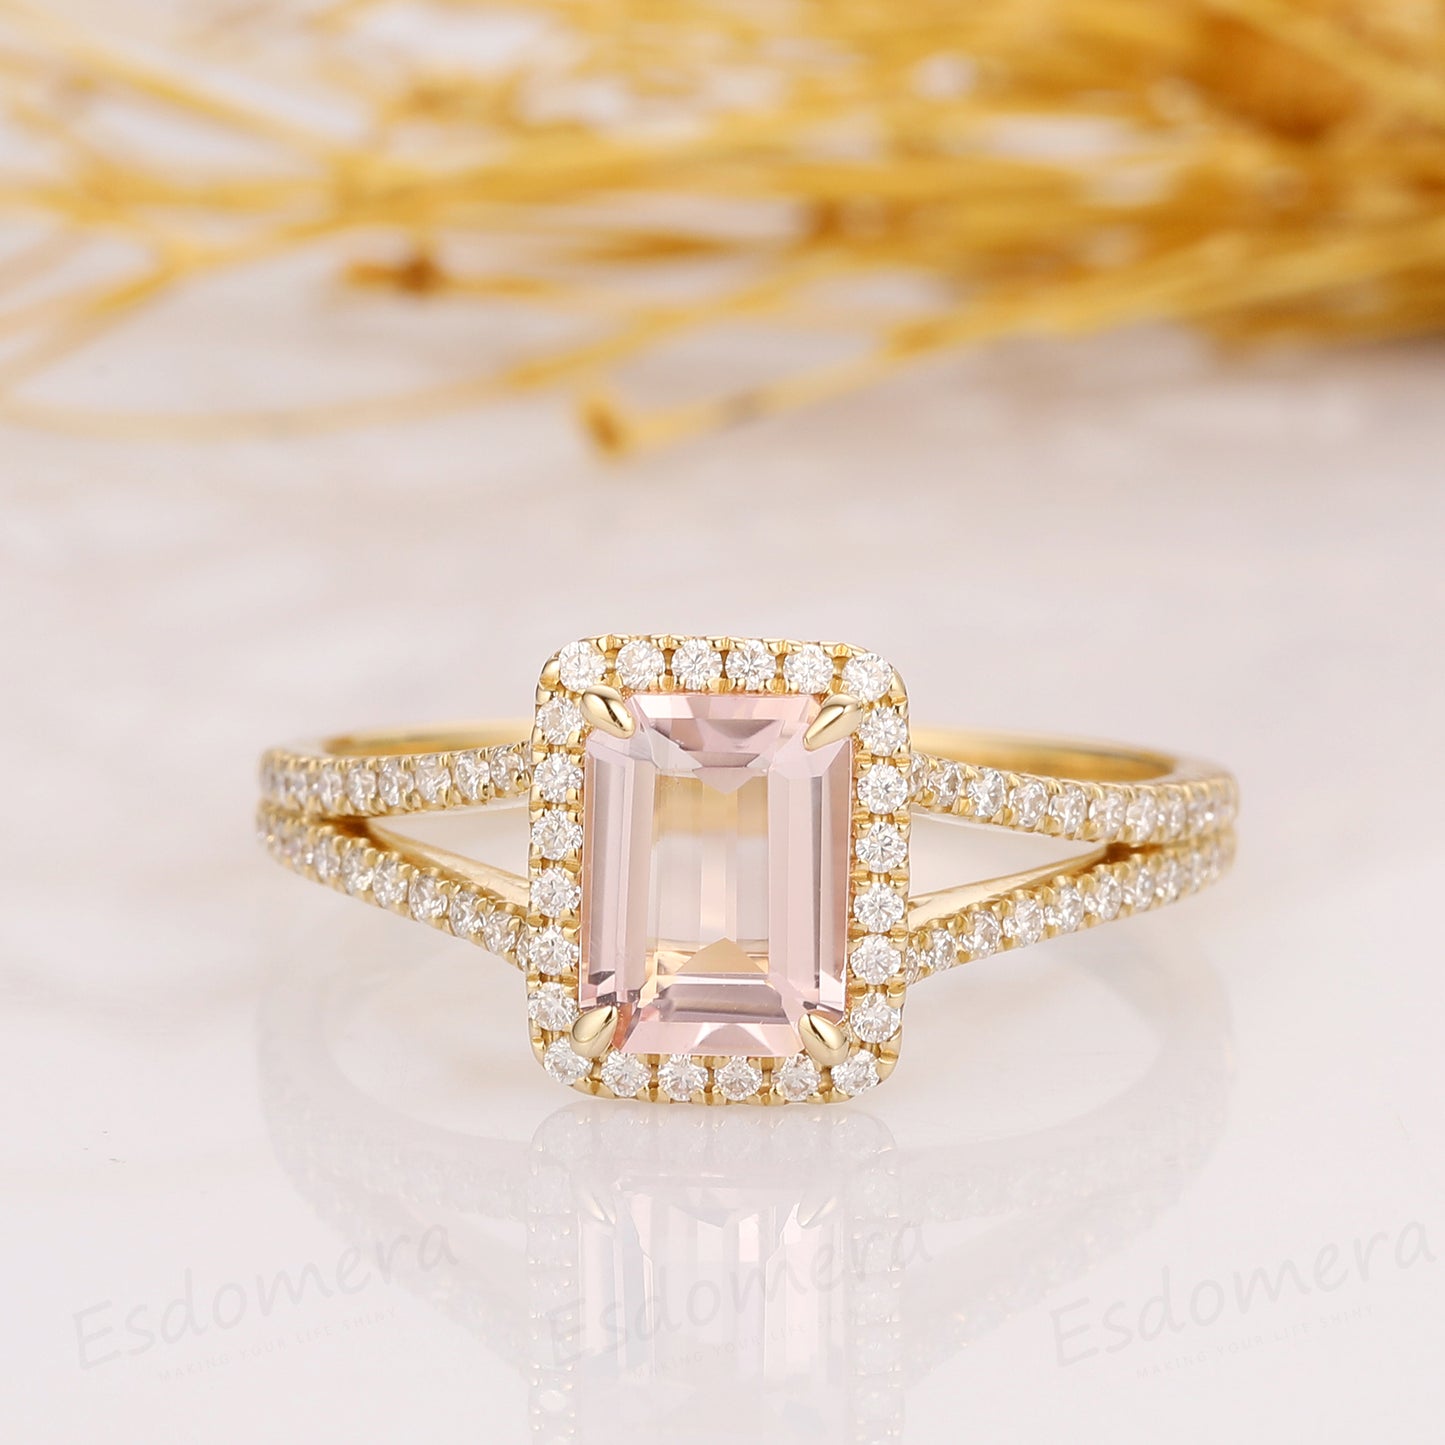 2.00CT Emerald Cut Morganite Engagement Ring, Halo Split Shanks Accents Ring, 14k Solid Yellow Gold Ring